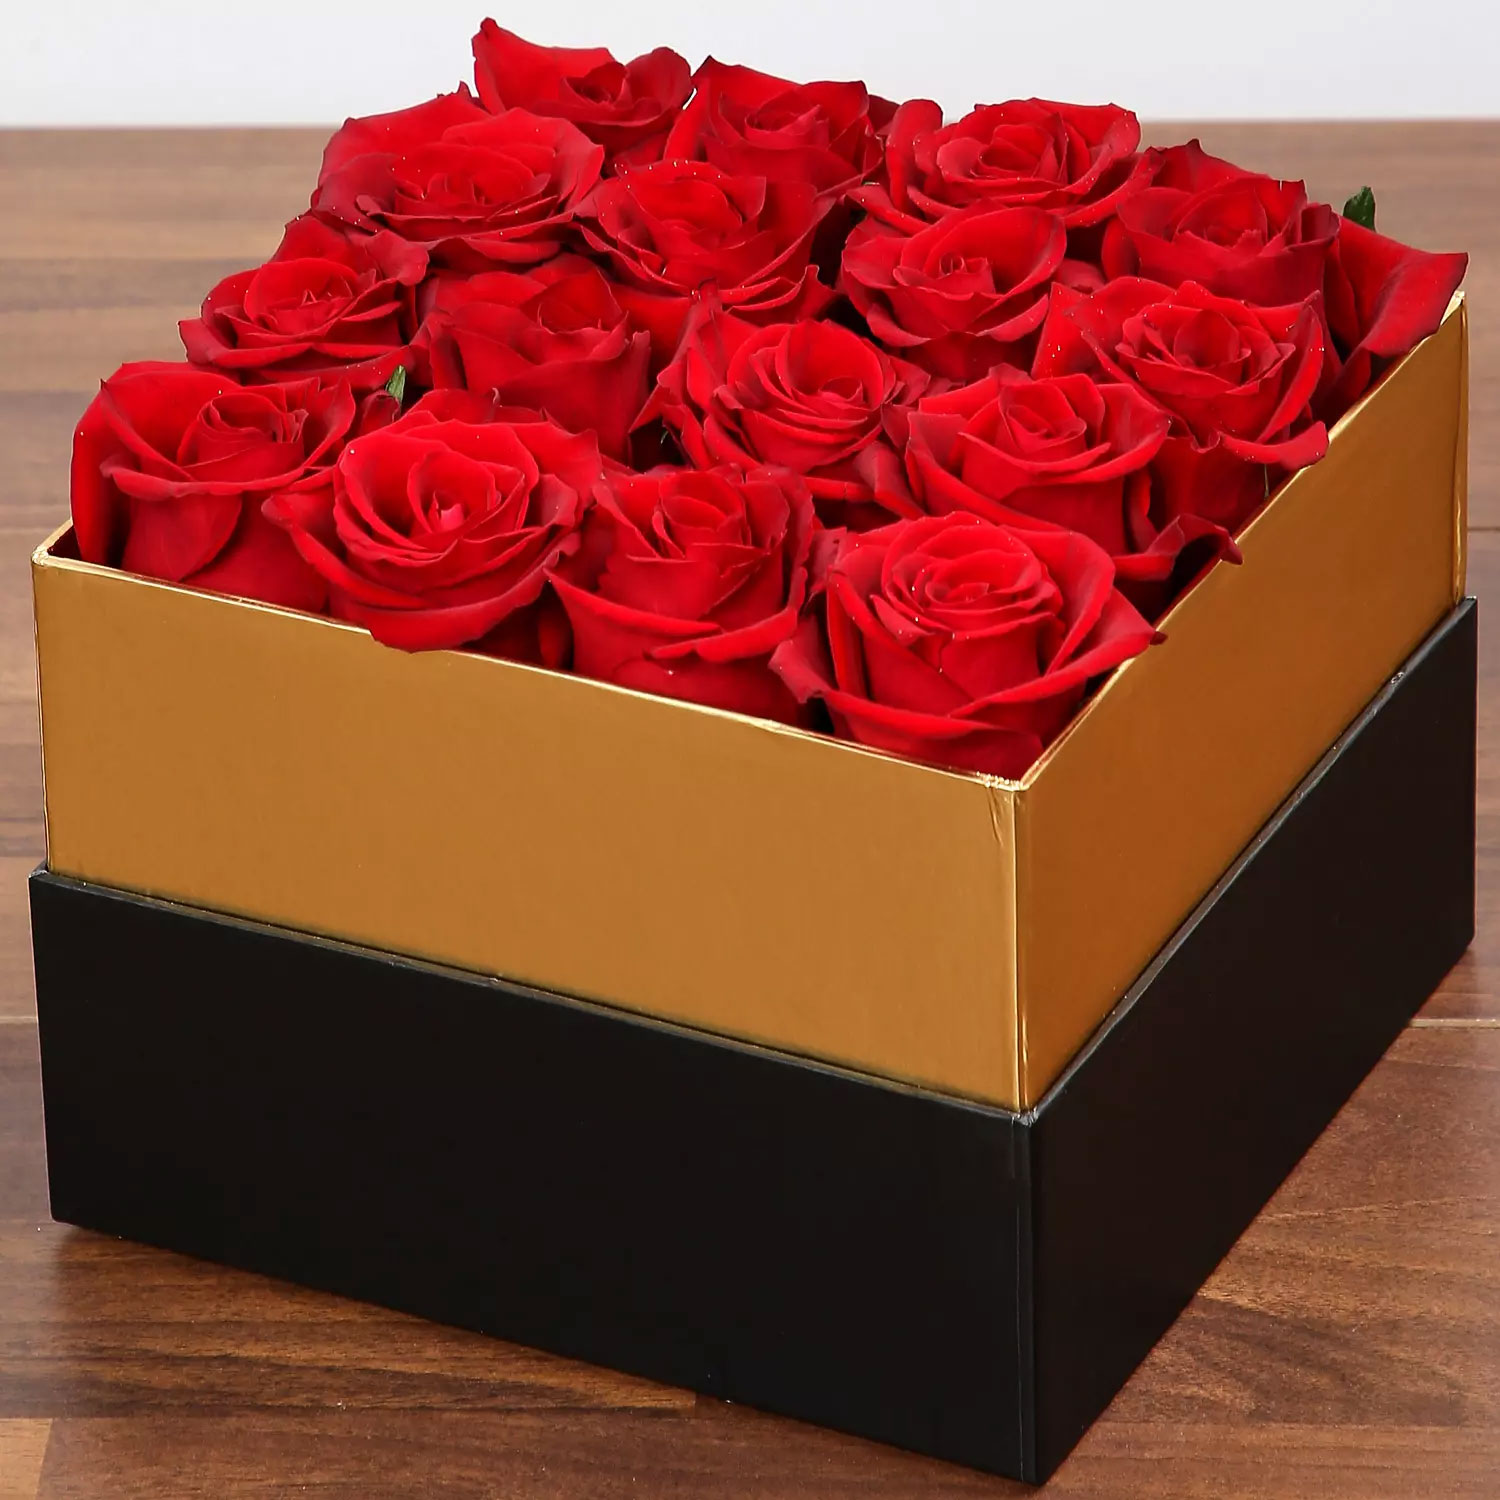 Online Lovely Red Rose Box Gift Delivery in Singapore - Ferns N Petals